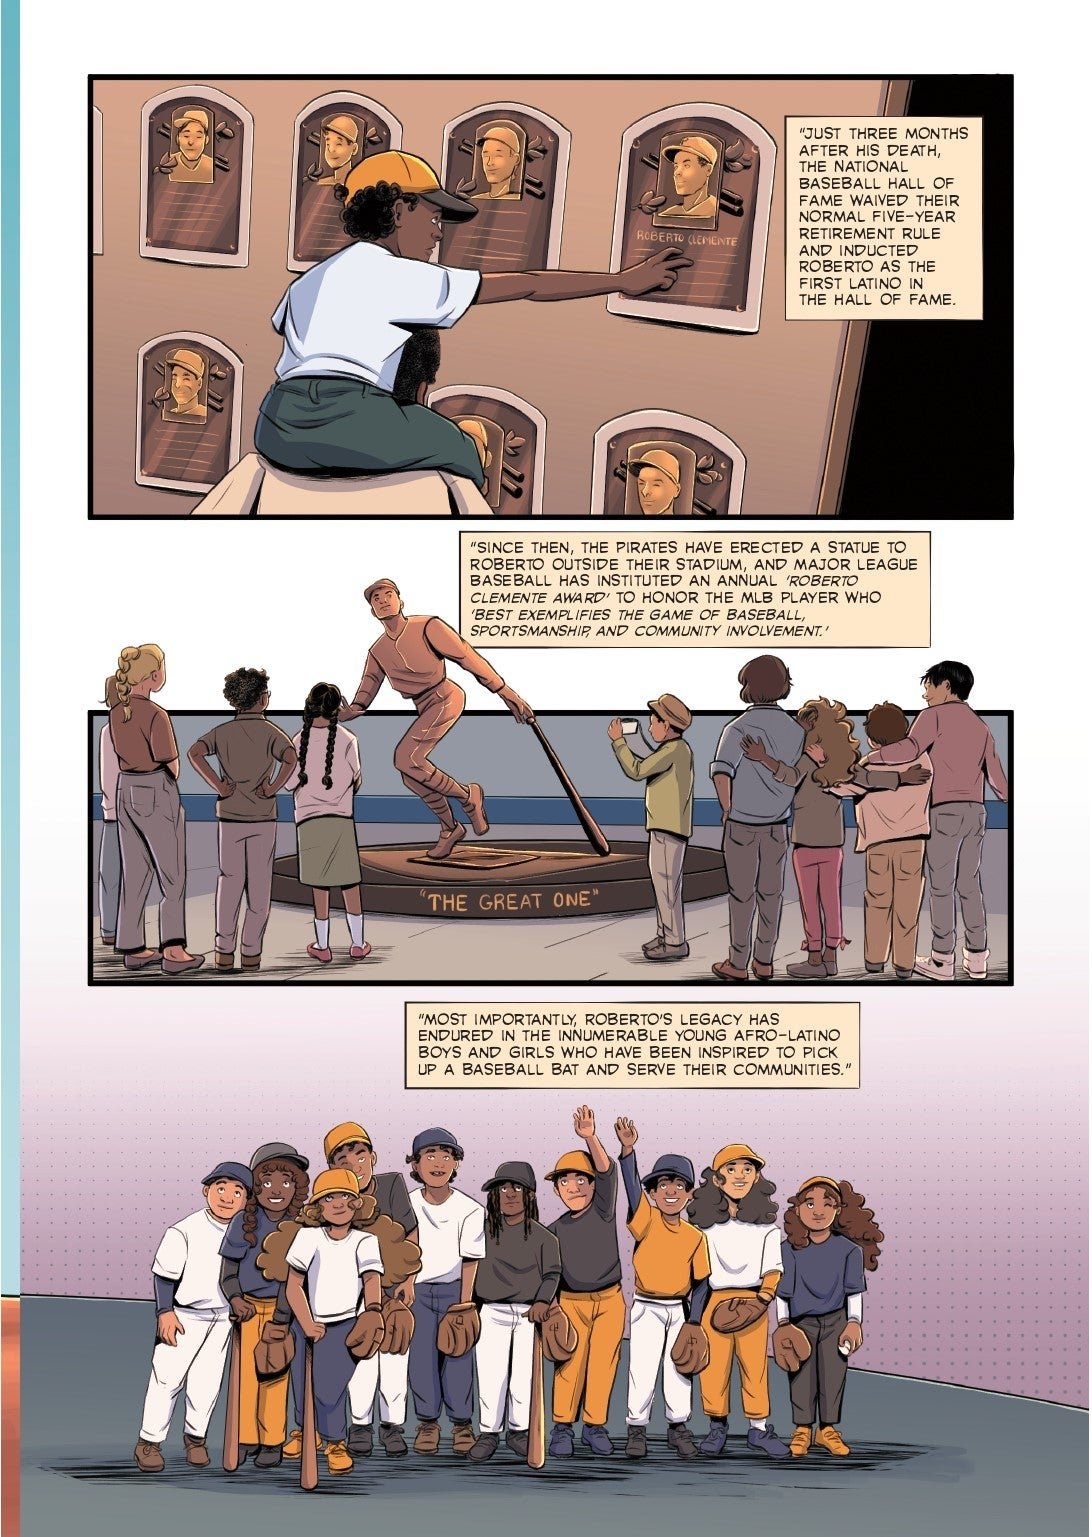 Interior comics page from SÍ, SE PUEDE: The Latino Heroes Who Changed the United States